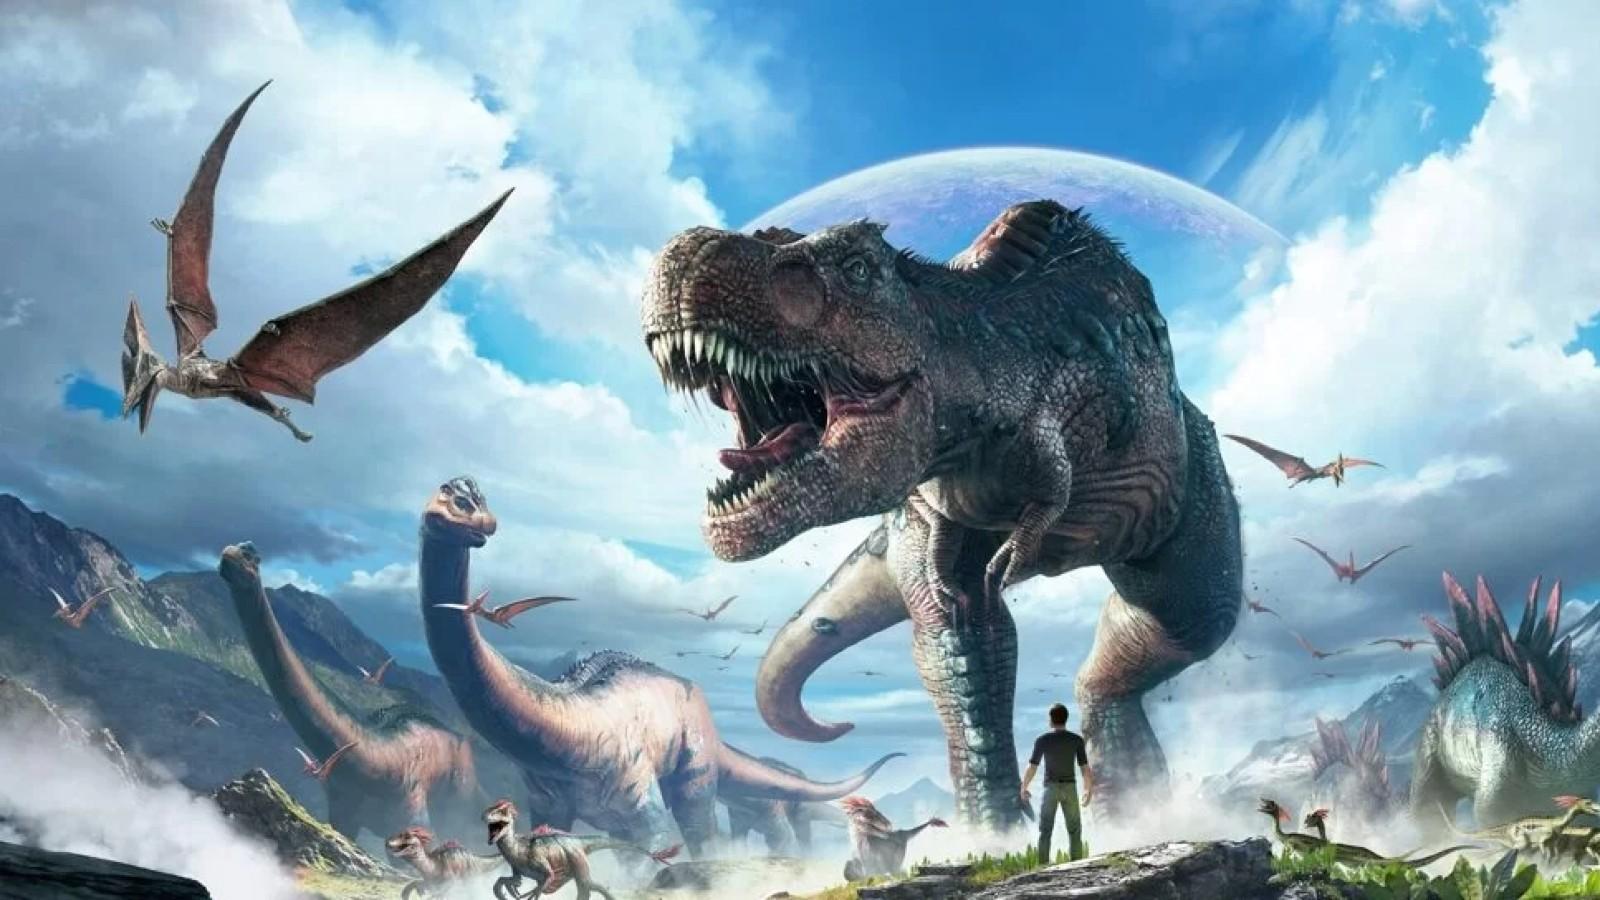 Ark 2 is coming to Game Pass in 2023